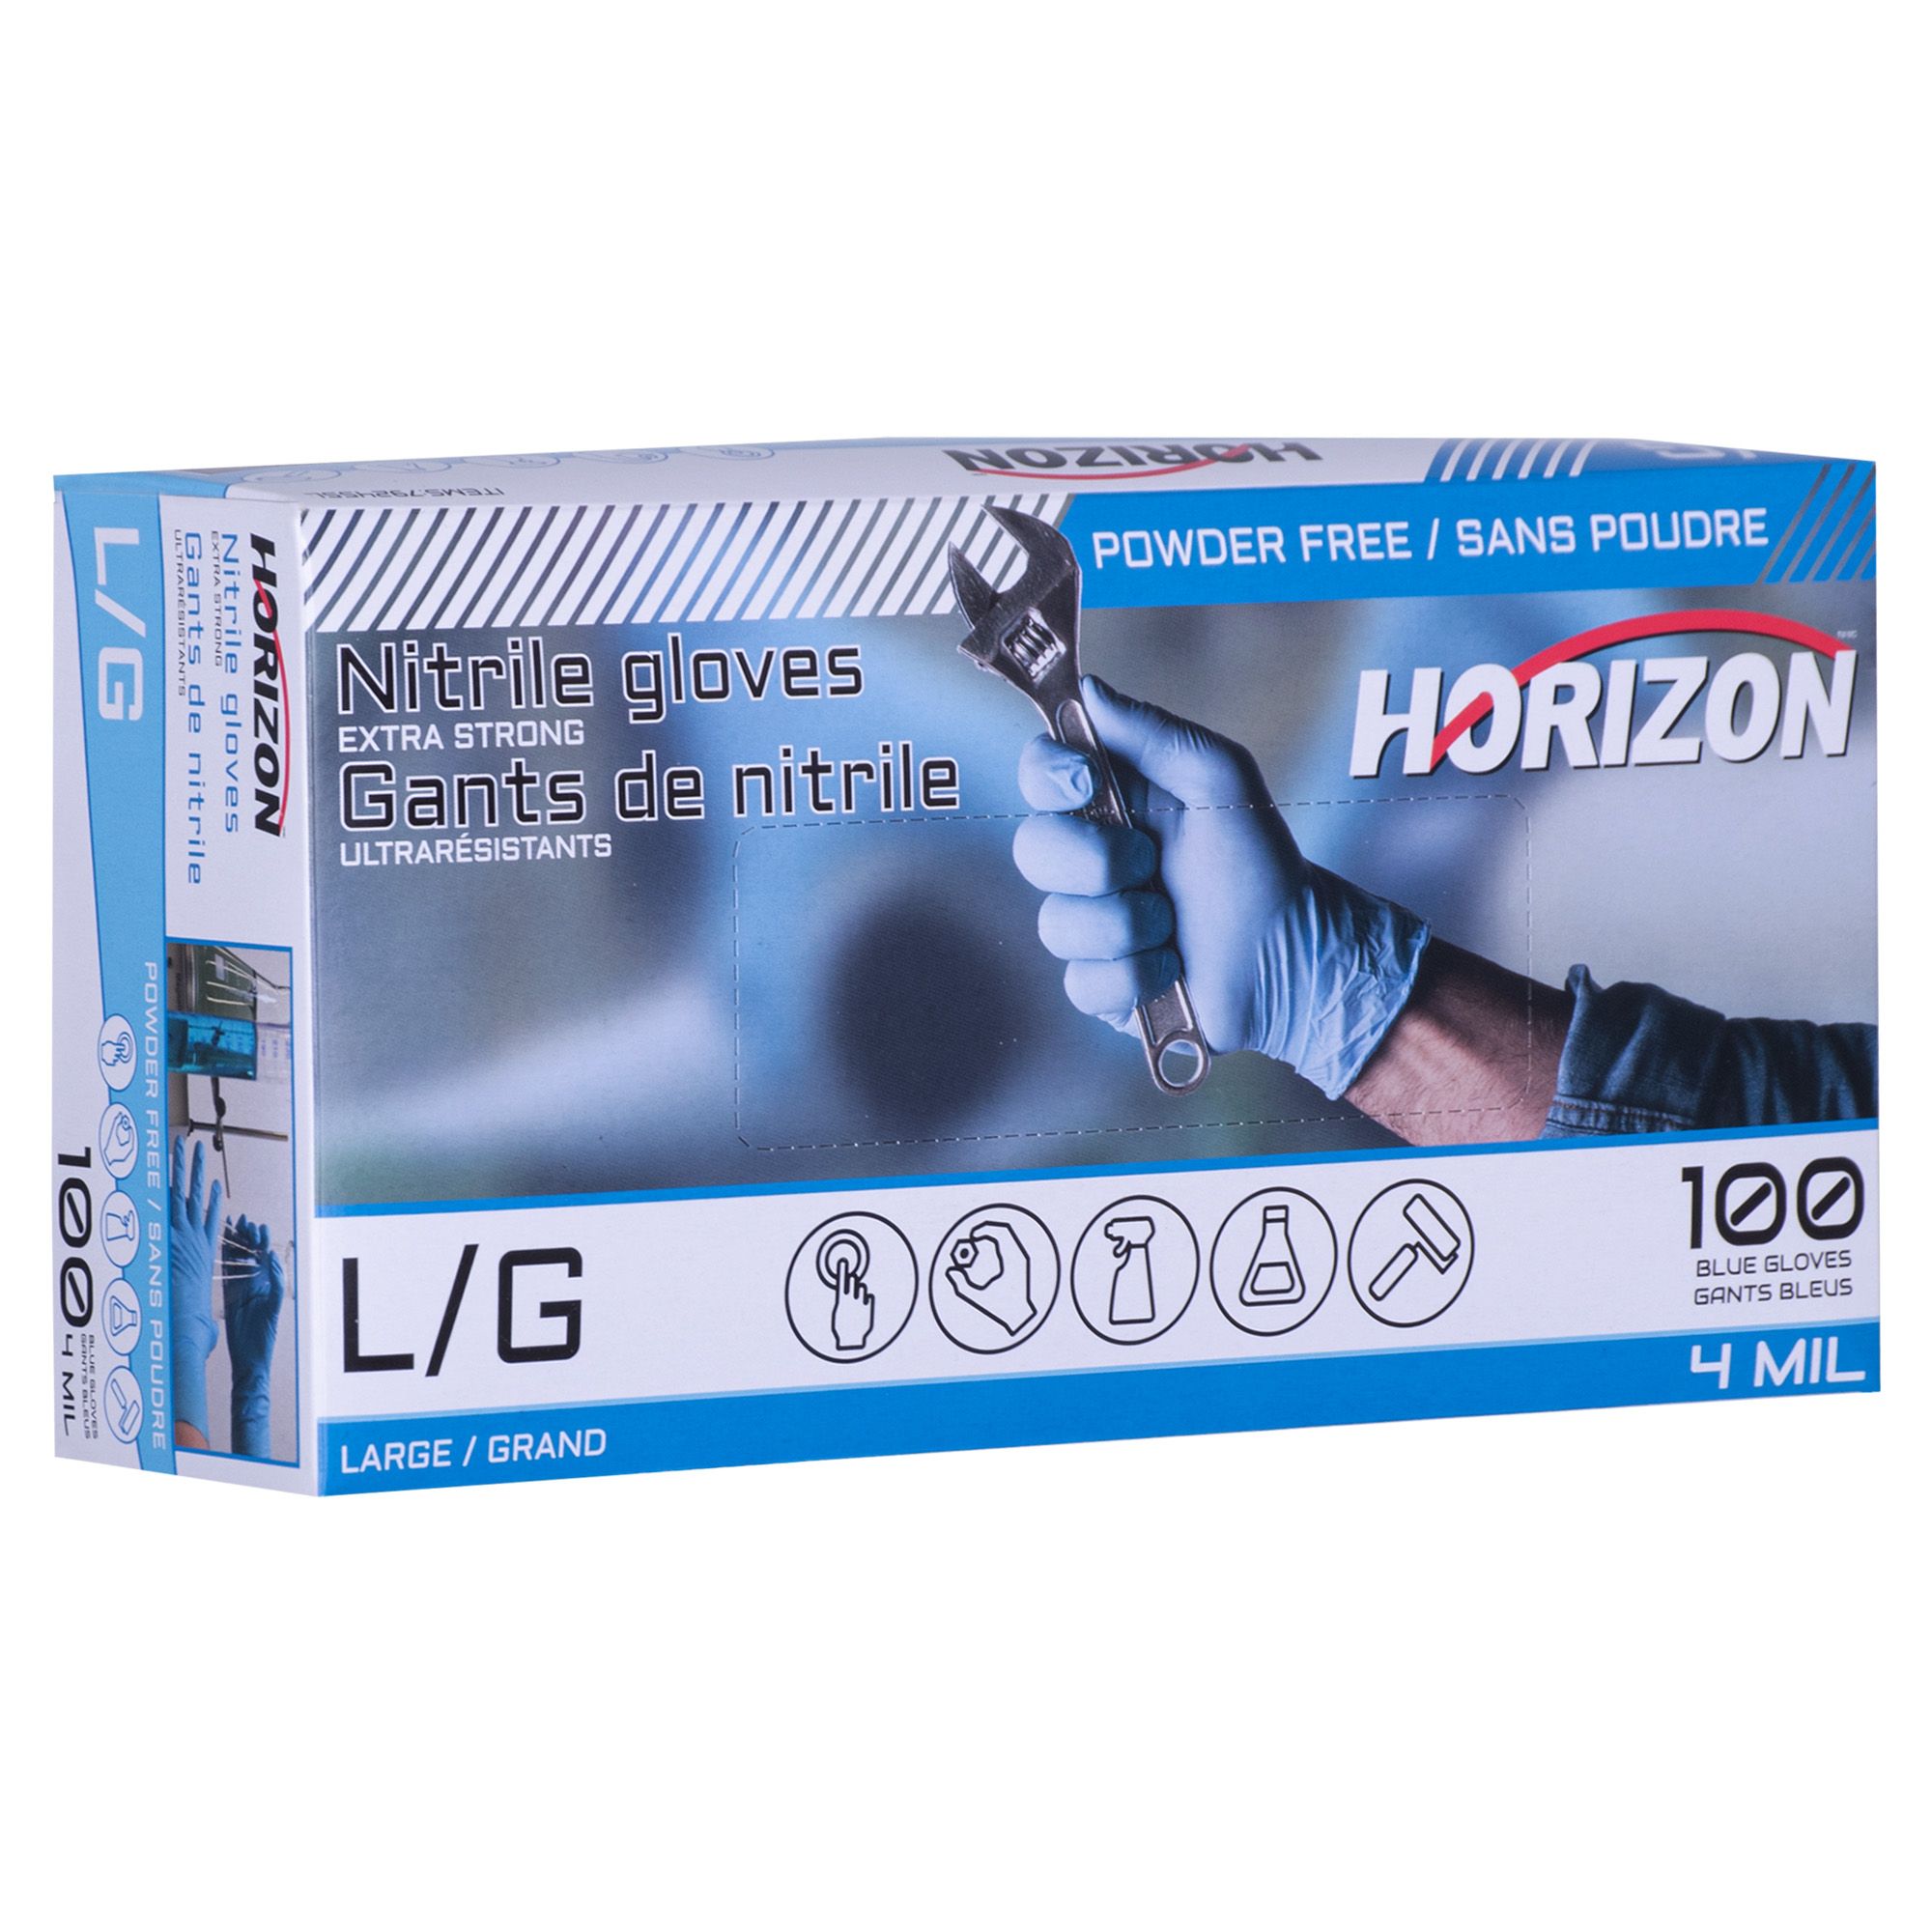 Horizon Blue Extra Strong 4-mil Nitrile Disposable Powder Free Work Gloves - Box of 100